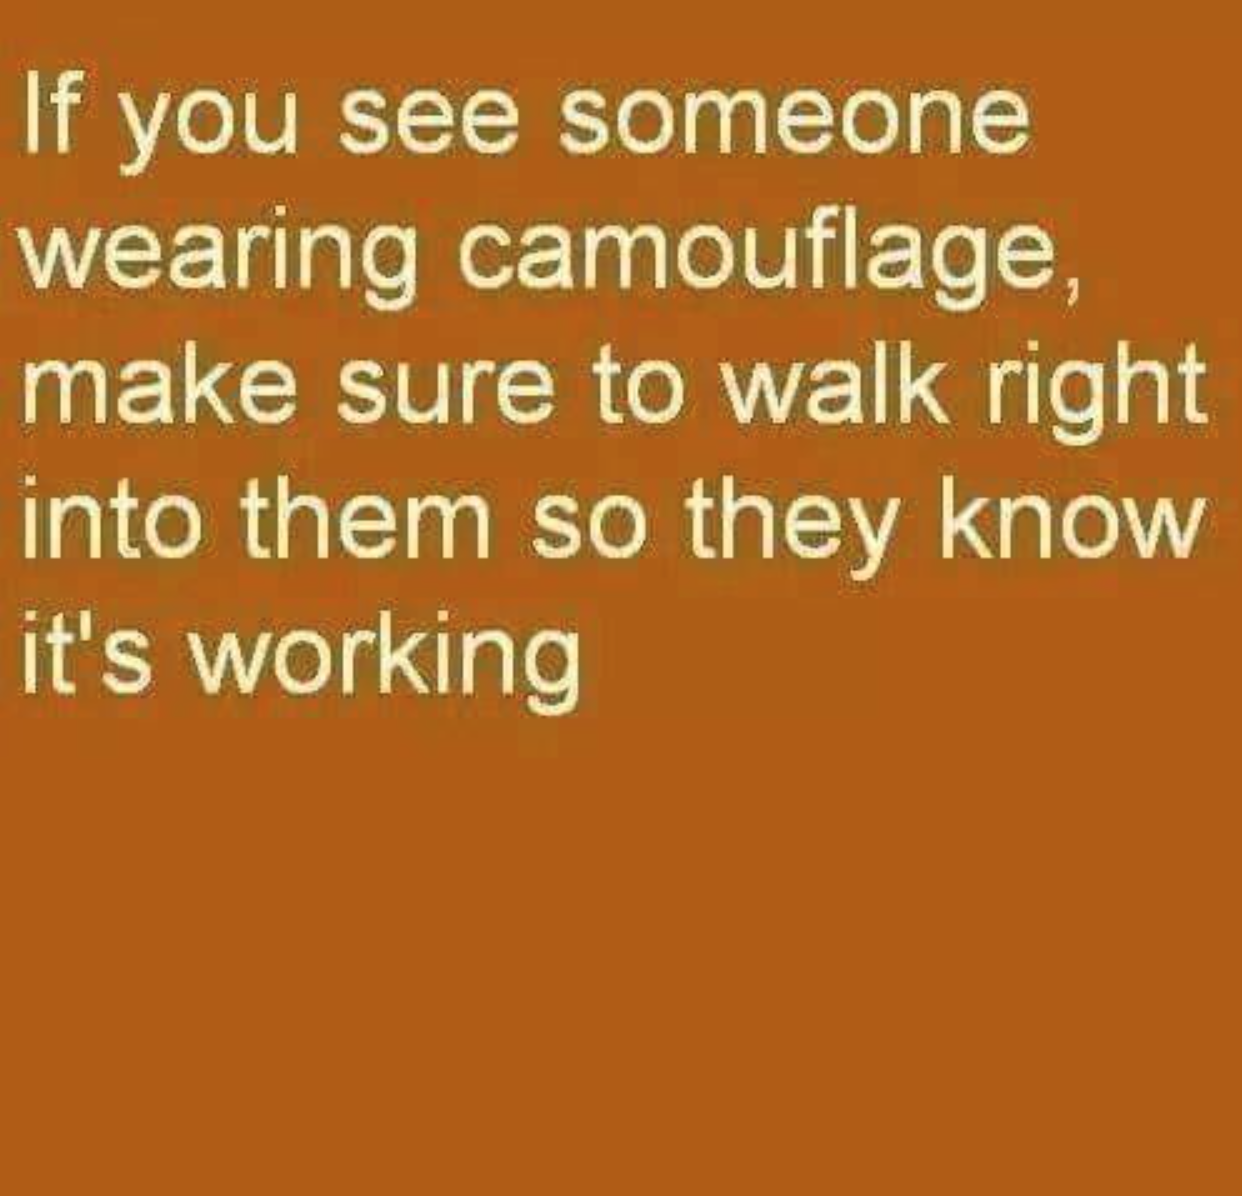 orange - If you see someone wearing camouflage, make sure to walk right into them so they know it's working